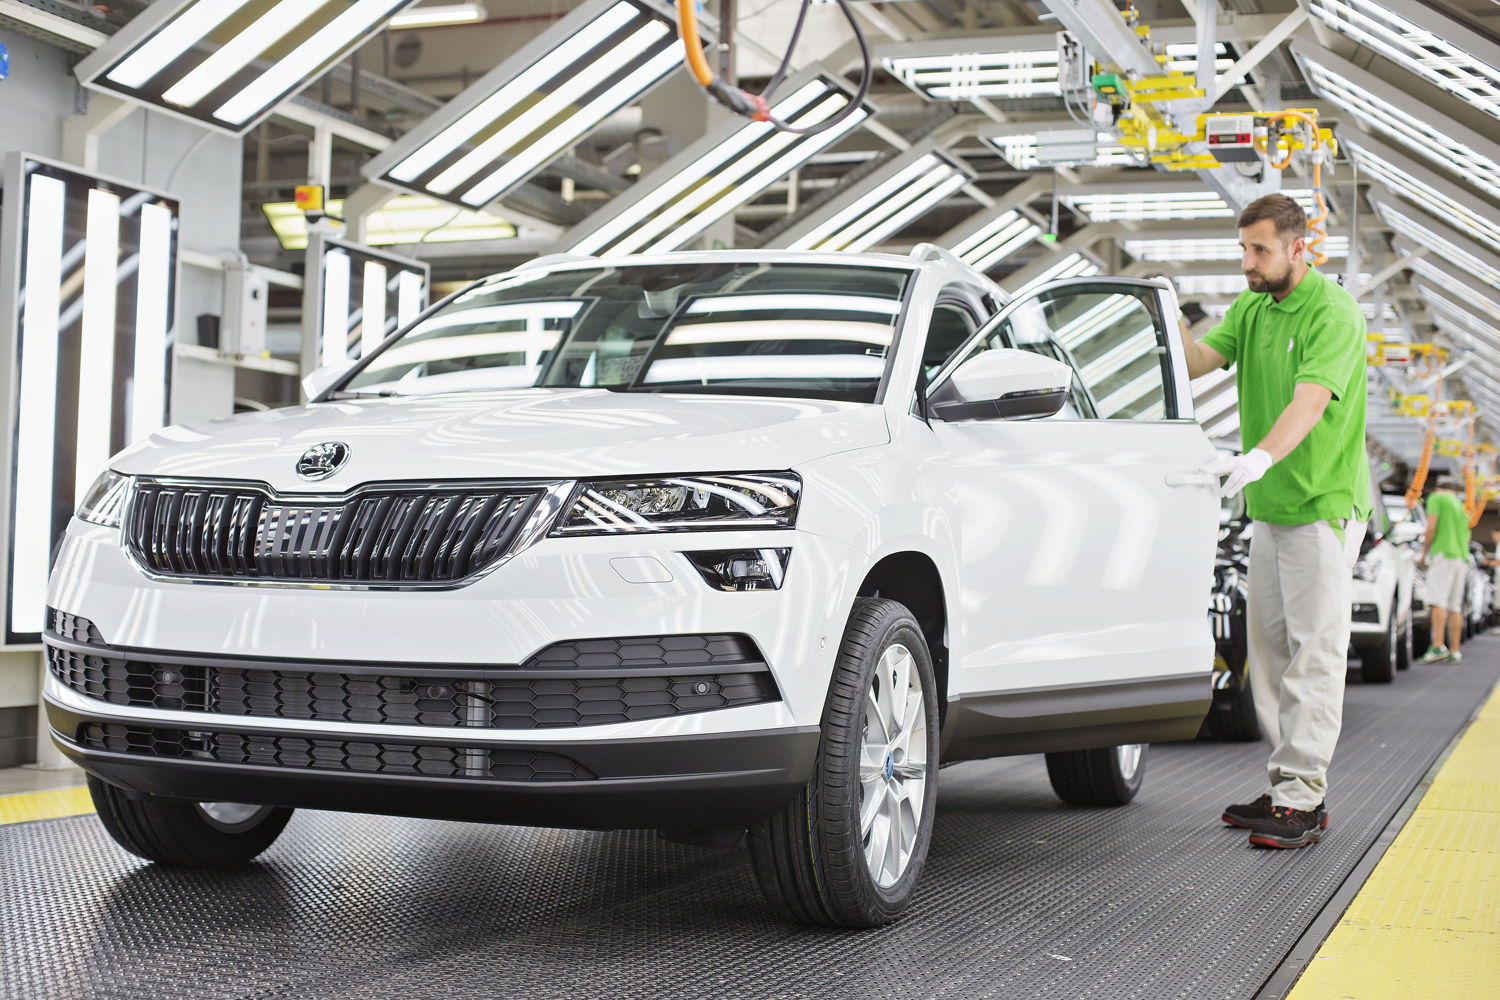 The millionth vehicle made in 2017 – a ŠKODA KAROQ in Laser White – rolled off the production line at ŠKODA’s Kvasiny plant.